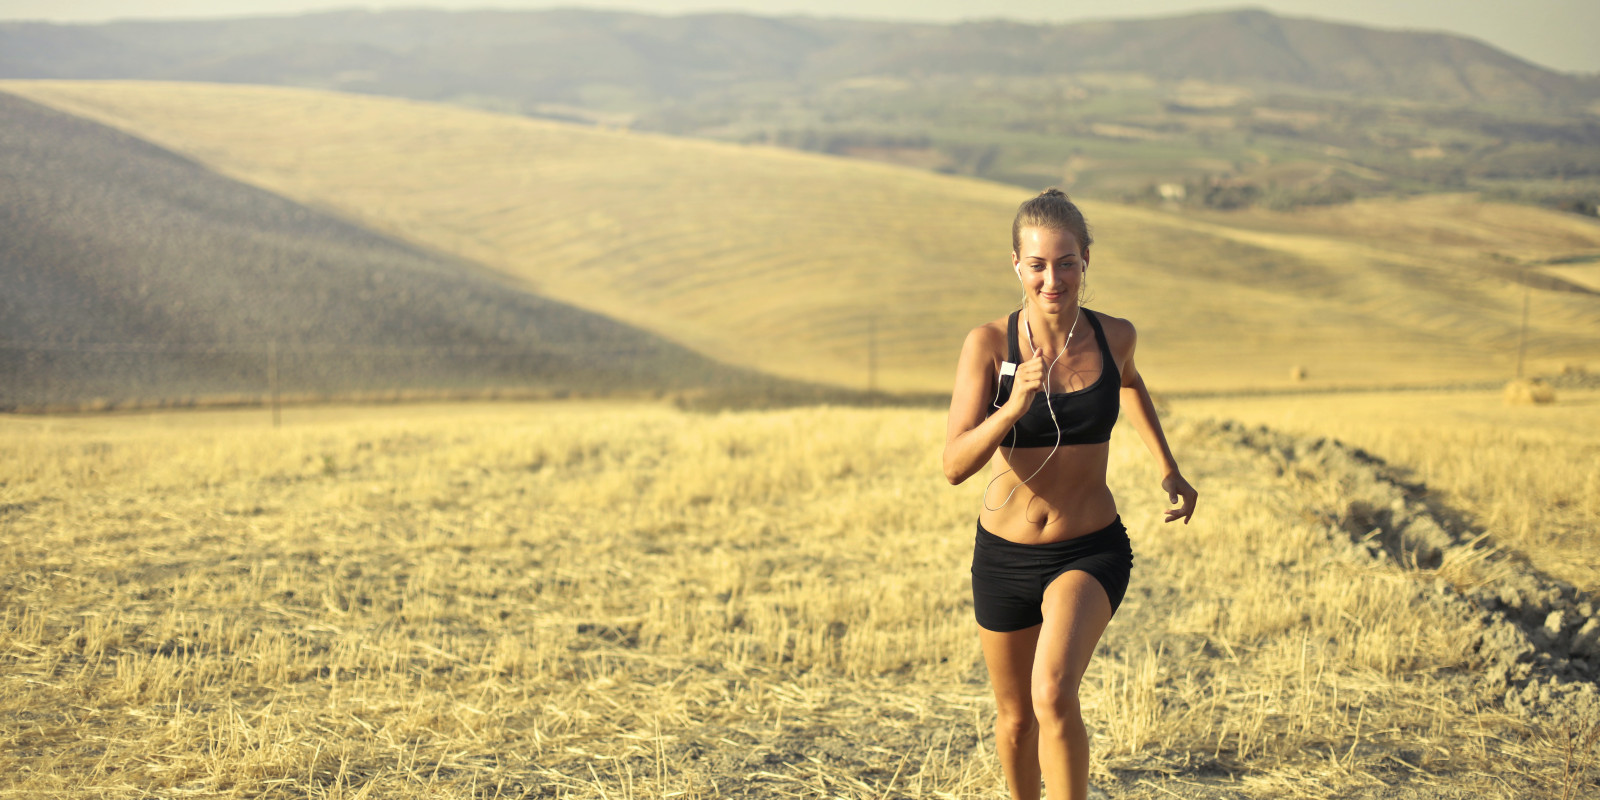 Photo by Andrea Piacquadio via Pexels, showing a cheerful sportswoman running along hill in summer